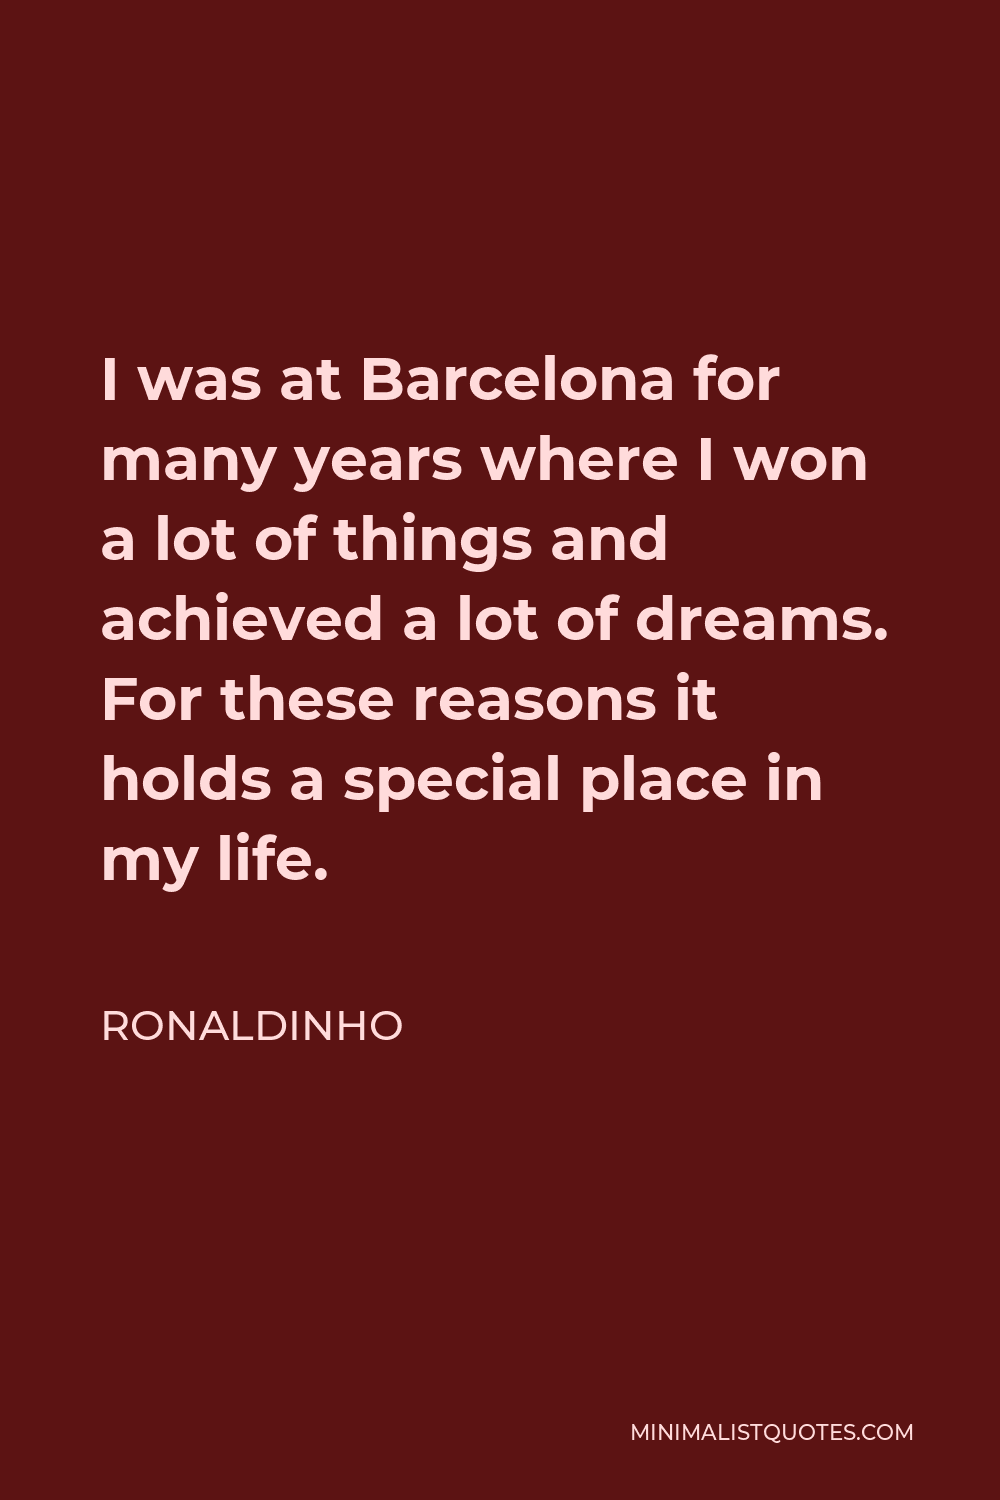 Ronaldinho Quote - I was at Barcelona for many years where I won a lot of things and achieved a lot of dreams. For these reasons it holds a special place in my life.